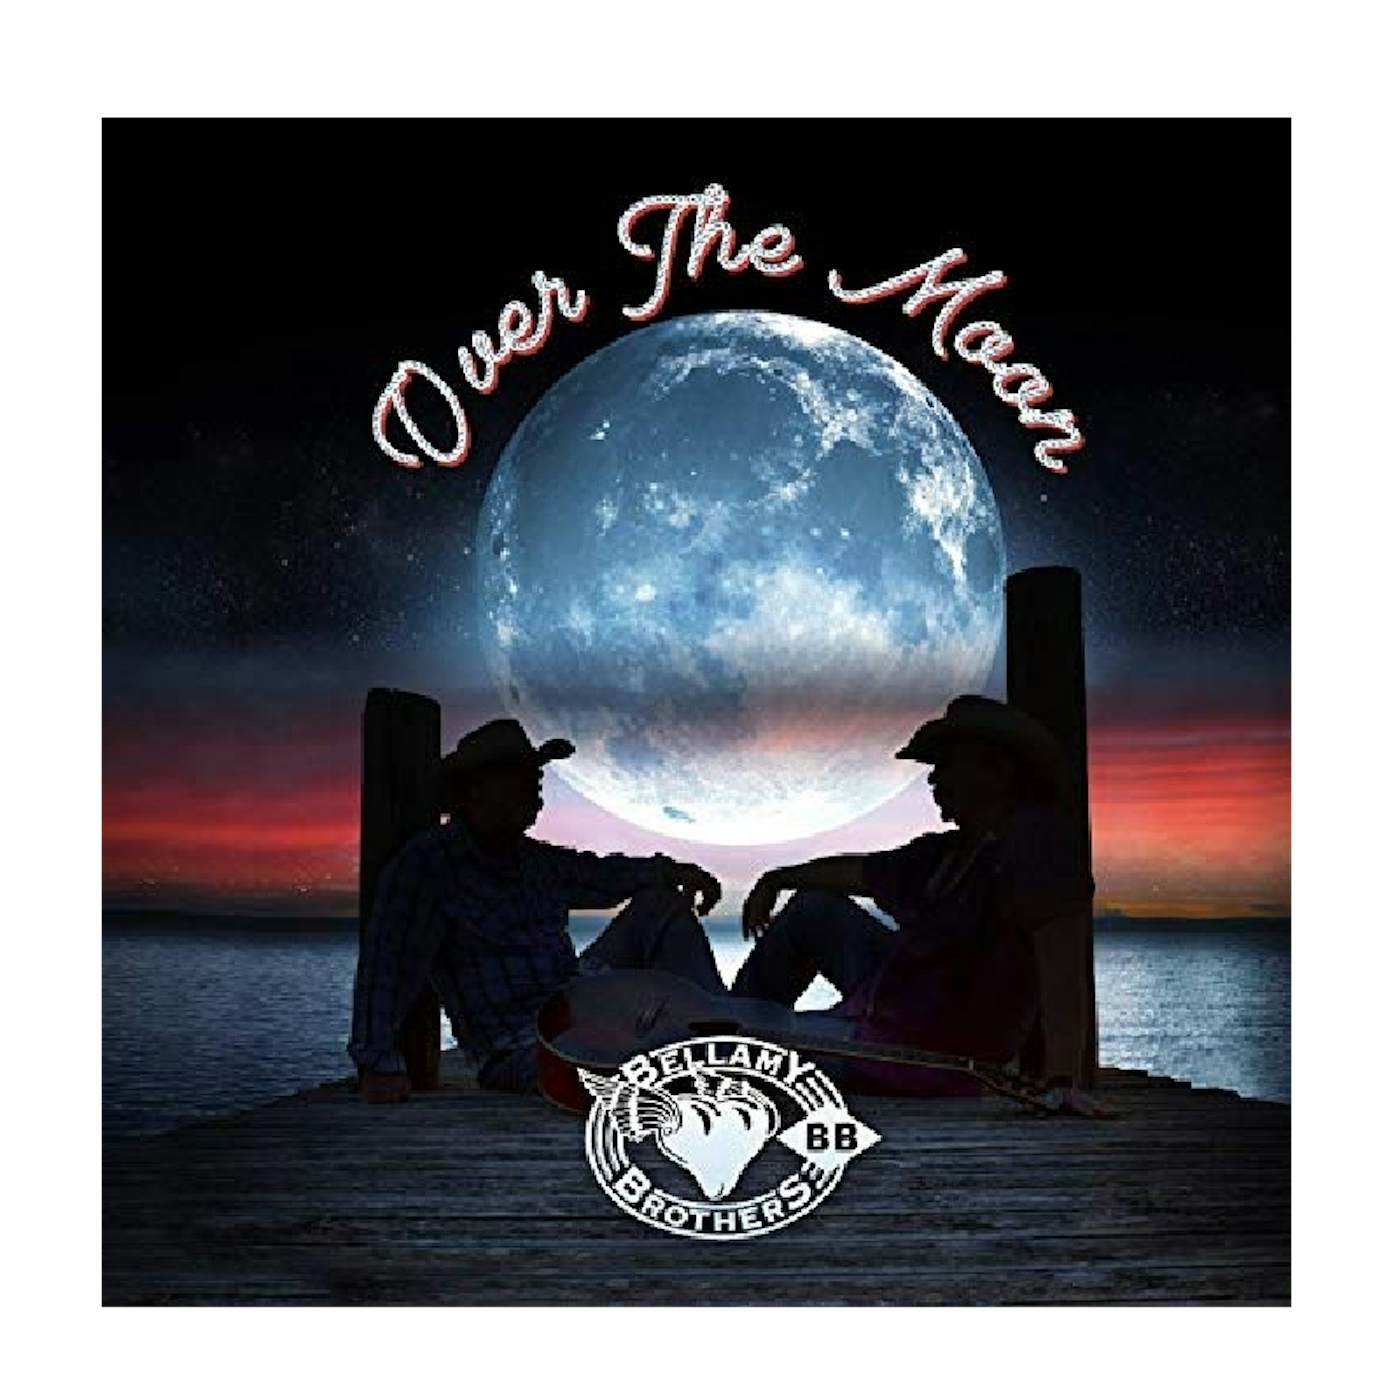 The Bellamy Brothers CD- Over the Moon